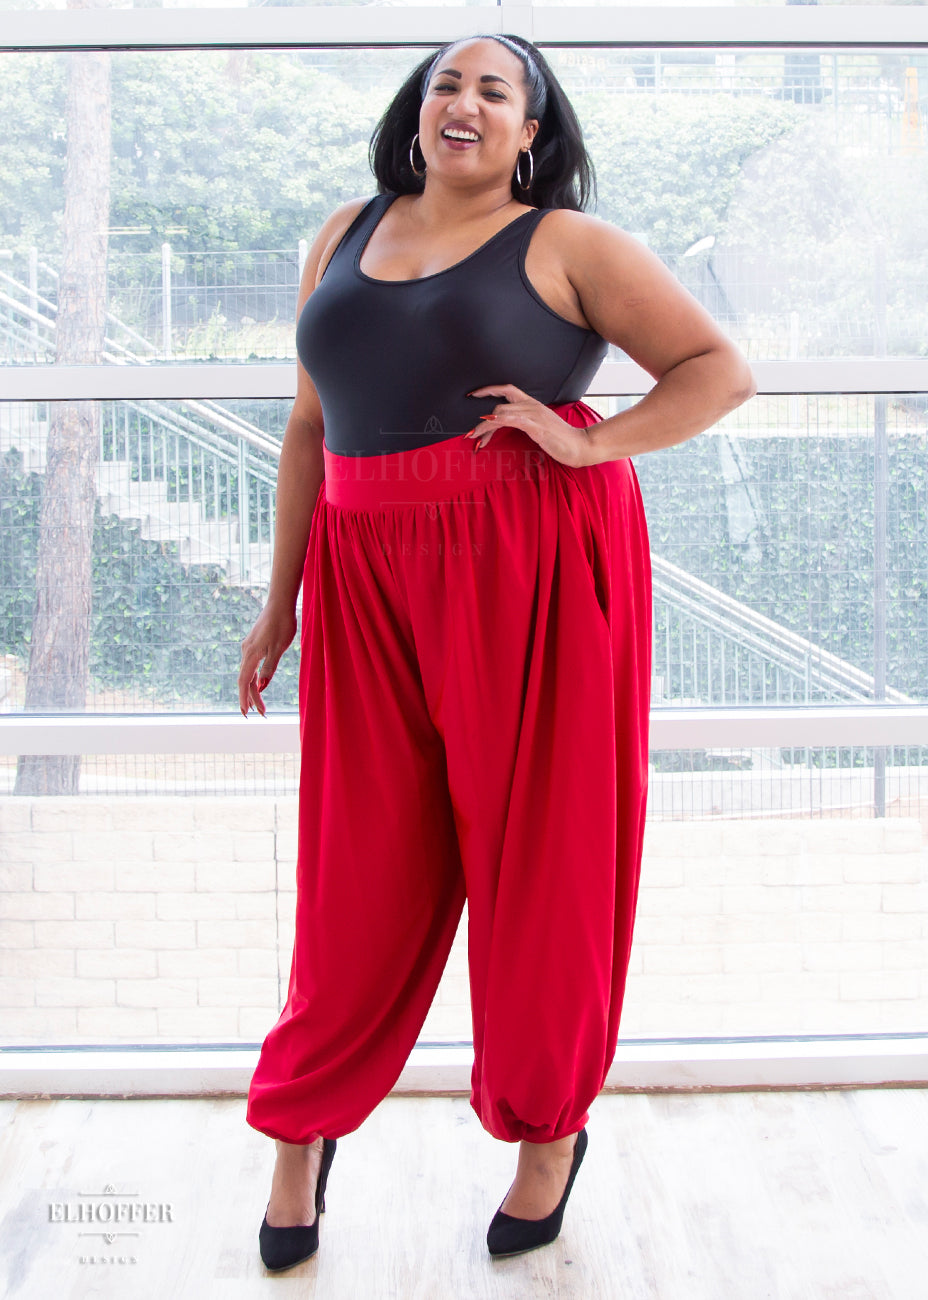 Tas pairs the black bodysuit with the red Yasmin Pants, loose fitting "puffy" pants with fitted waist and cuffs.